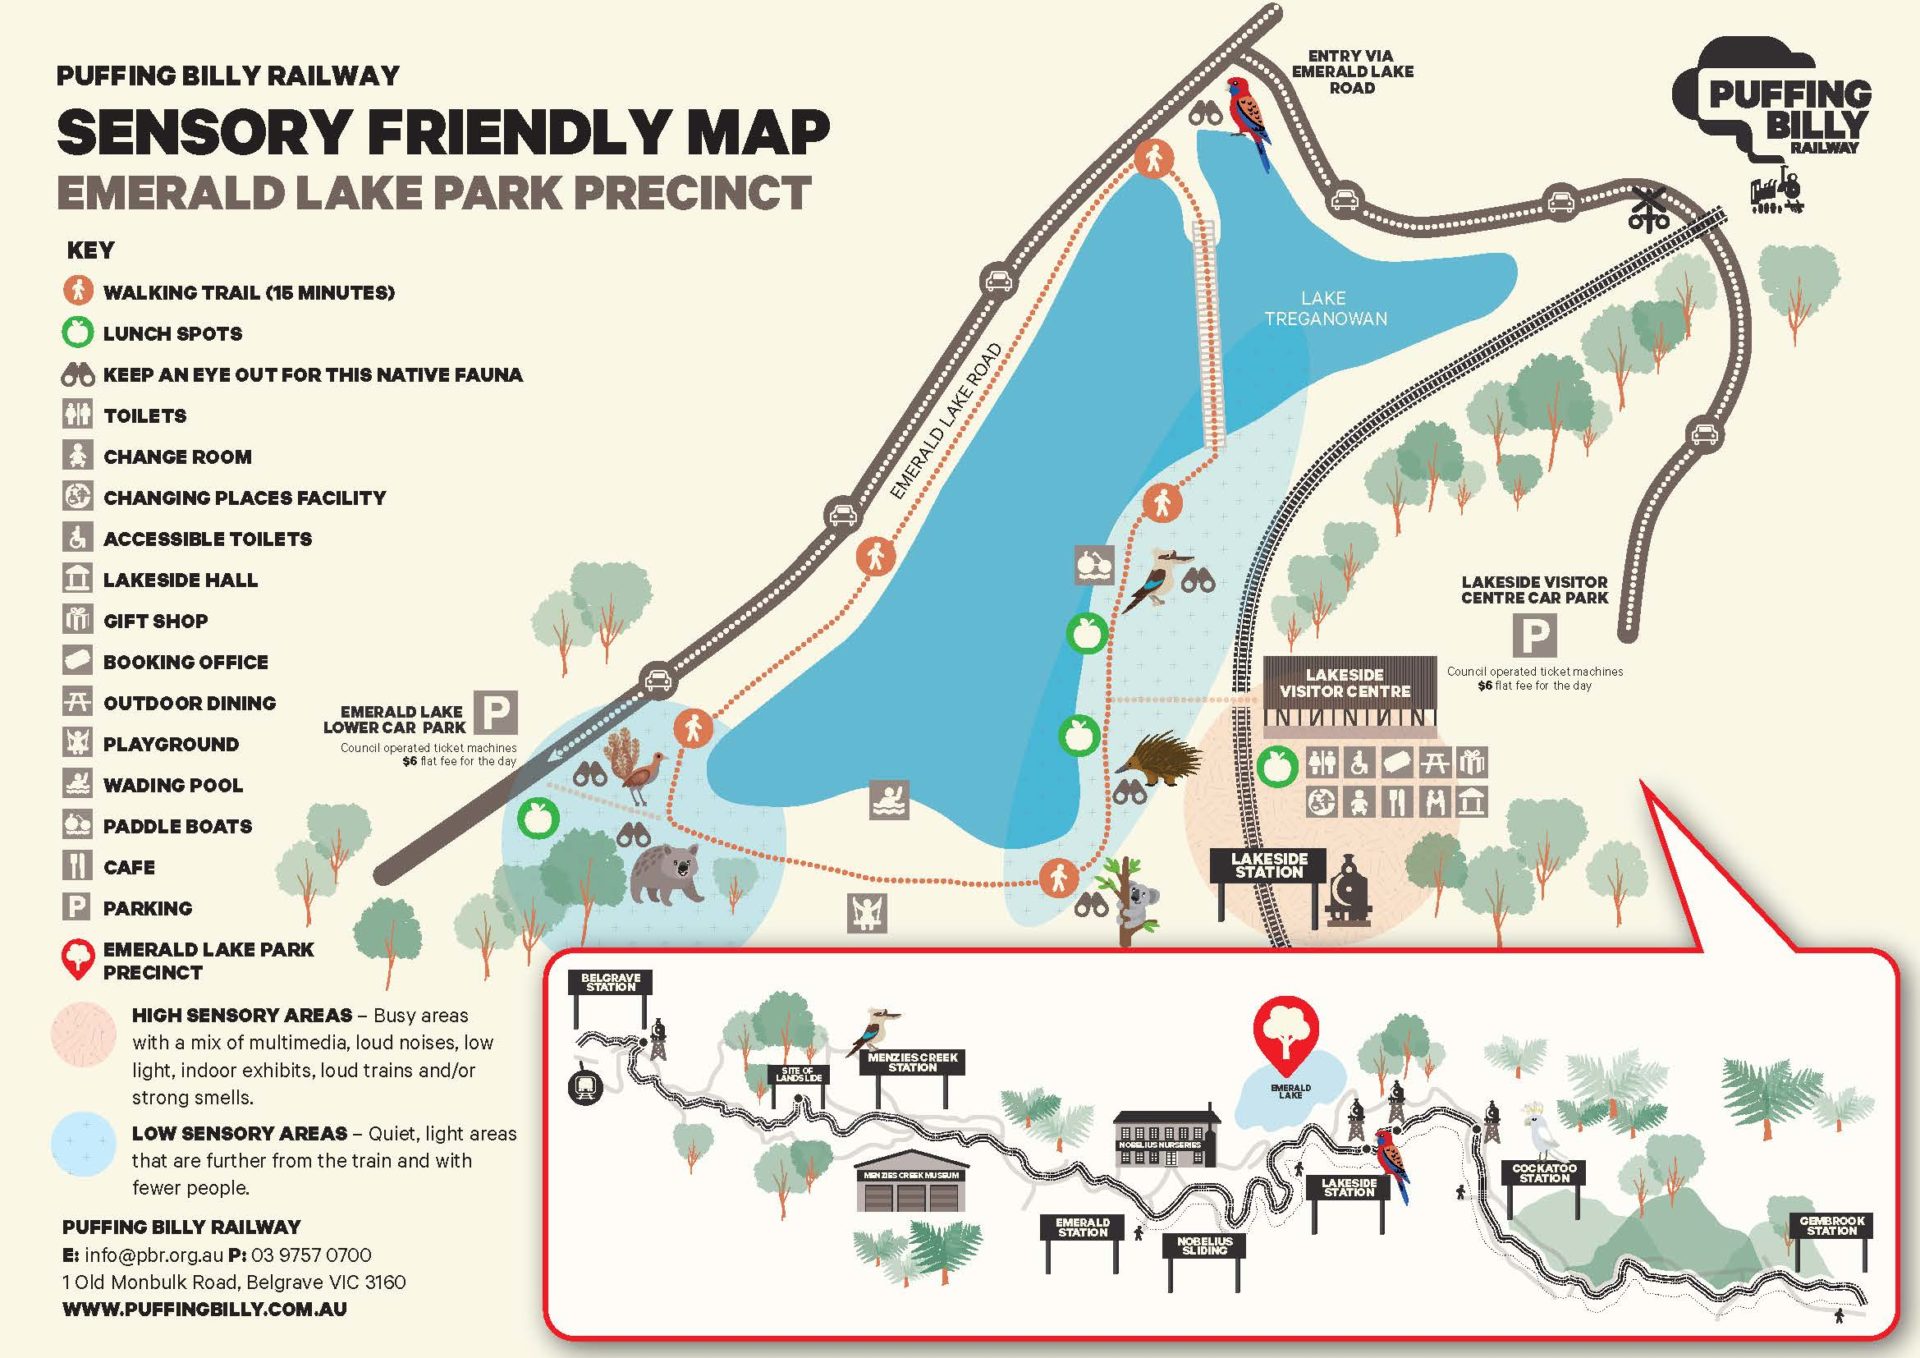 Map of the Emerald Lake Park Precinct, showing low sensory and high sensory areas, facilities, parking and access. 